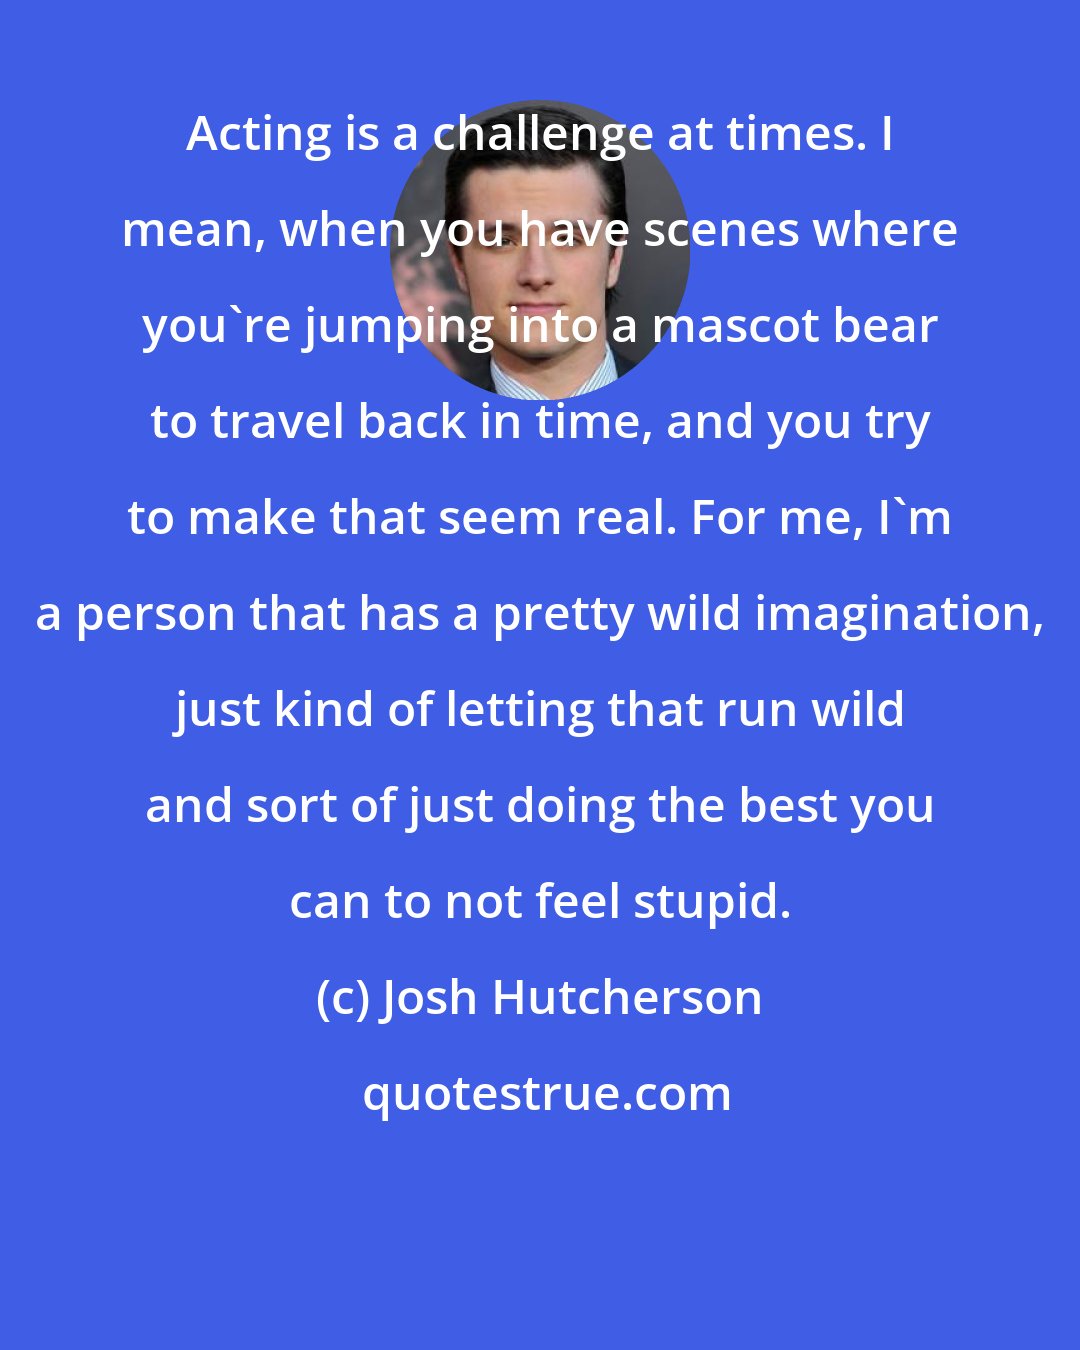 Josh Hutcherson: Acting is a challenge at times. I mean, when you have scenes where you're jumping into a mascot bear to travel back in time, and you try to make that seem real. For me, I'm a person that has a pretty wild imagination, just kind of letting that run wild and sort of just doing the best you can to not feel stupid.